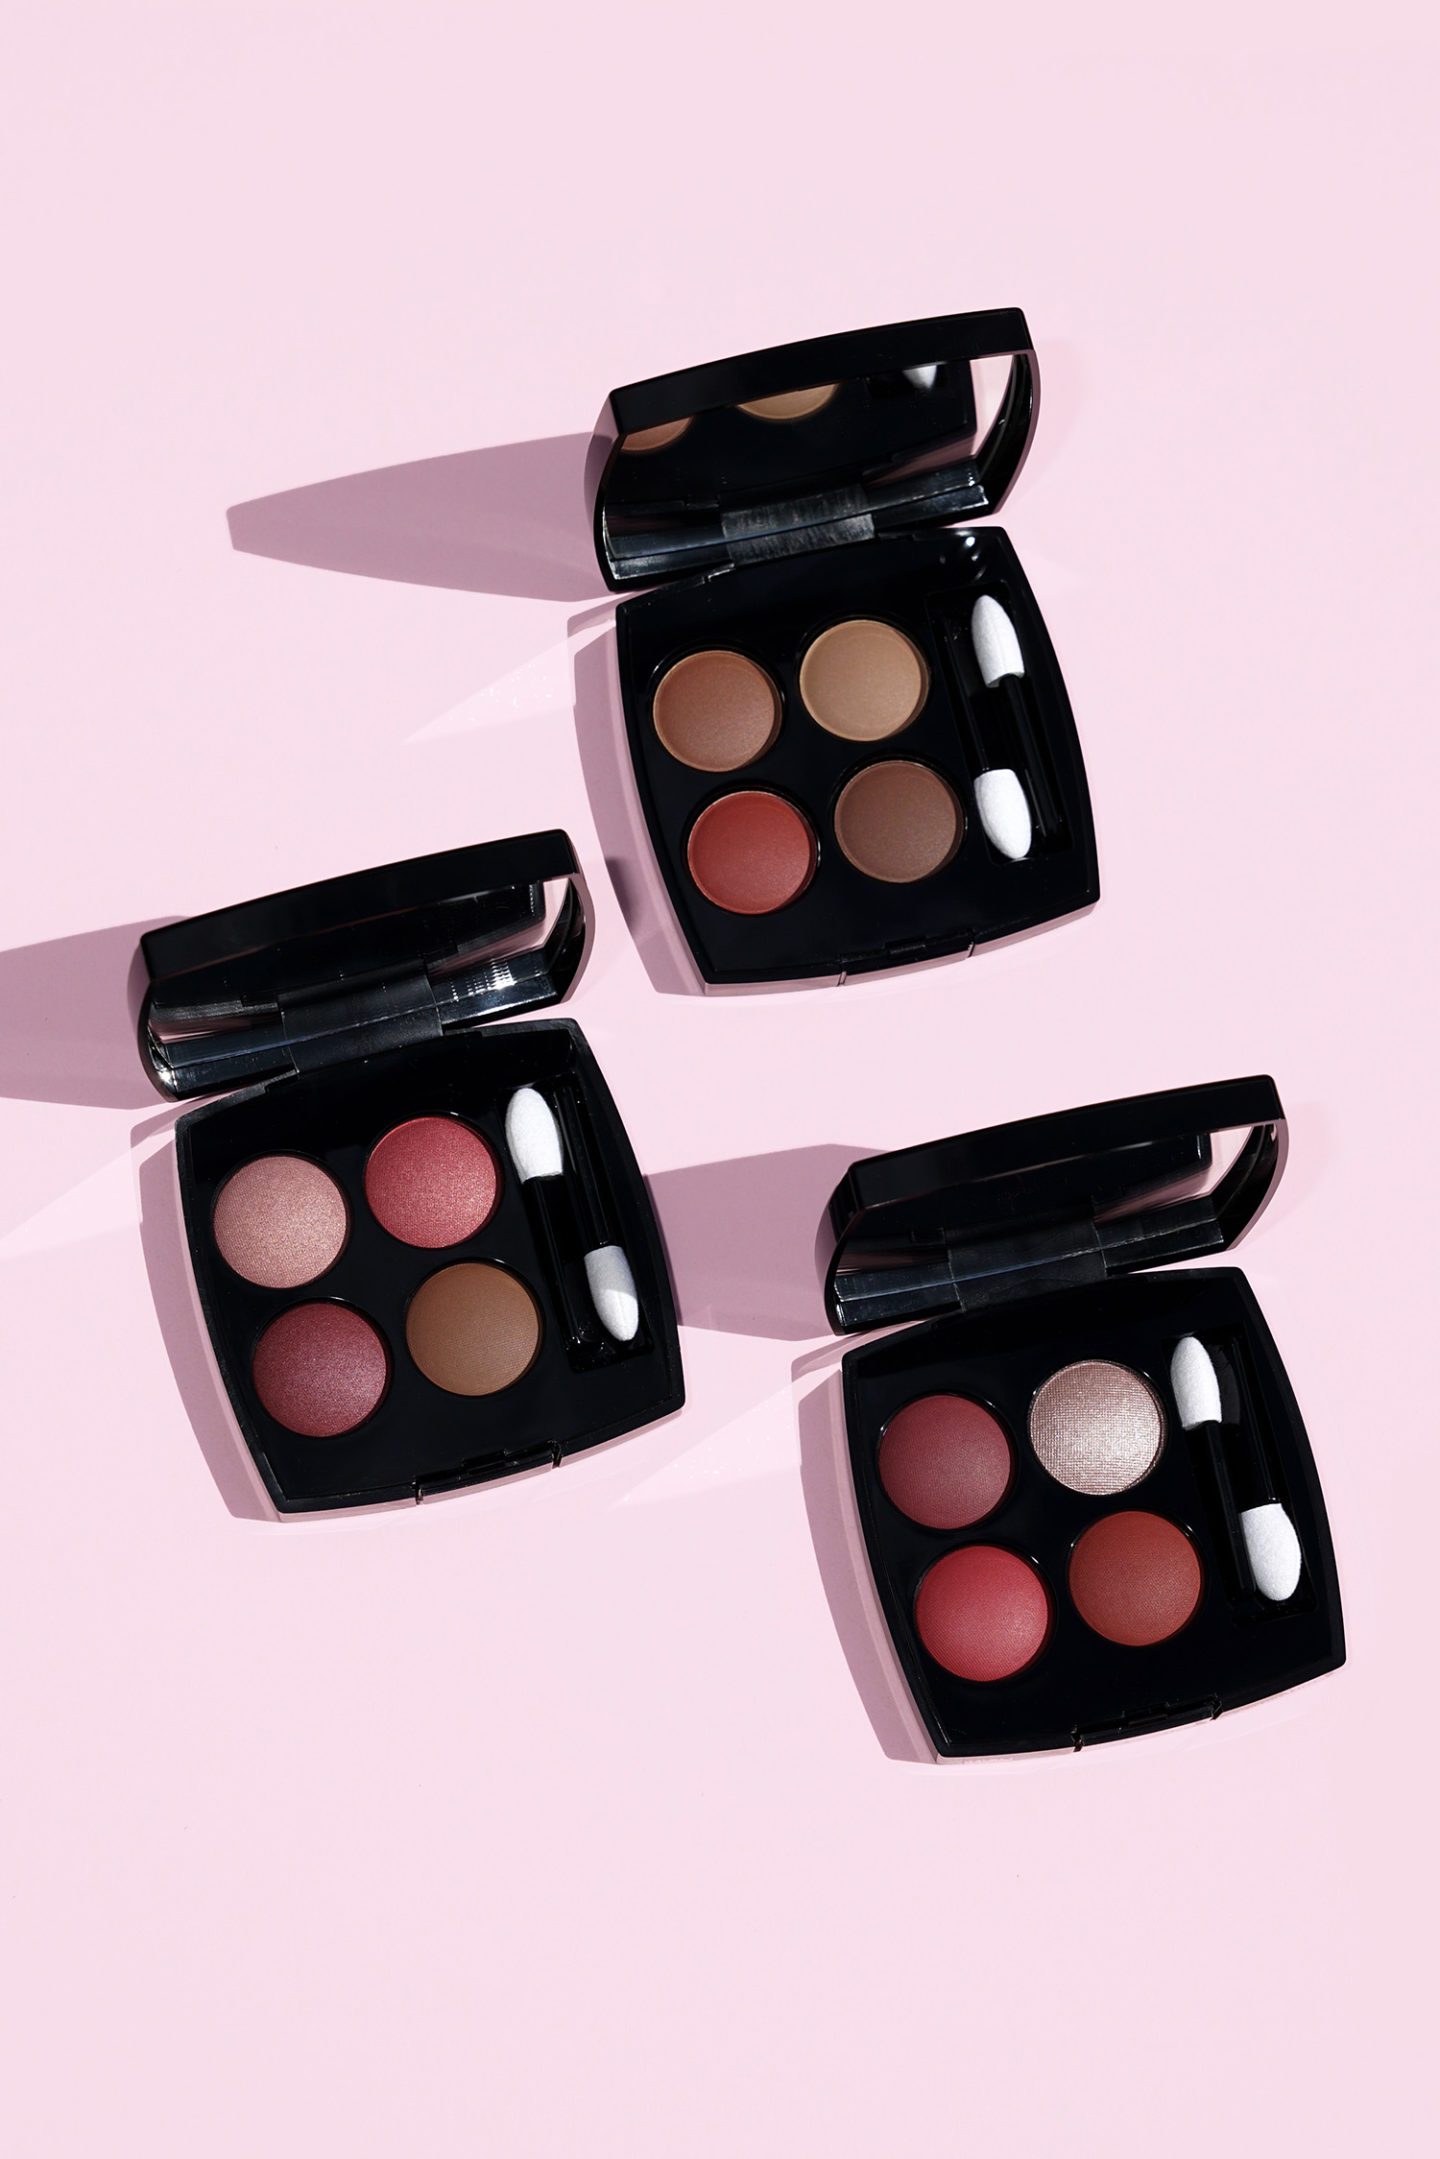 Chanel Fall-Winter 2020 - Les 4 Ombres Eyeshadow Quads